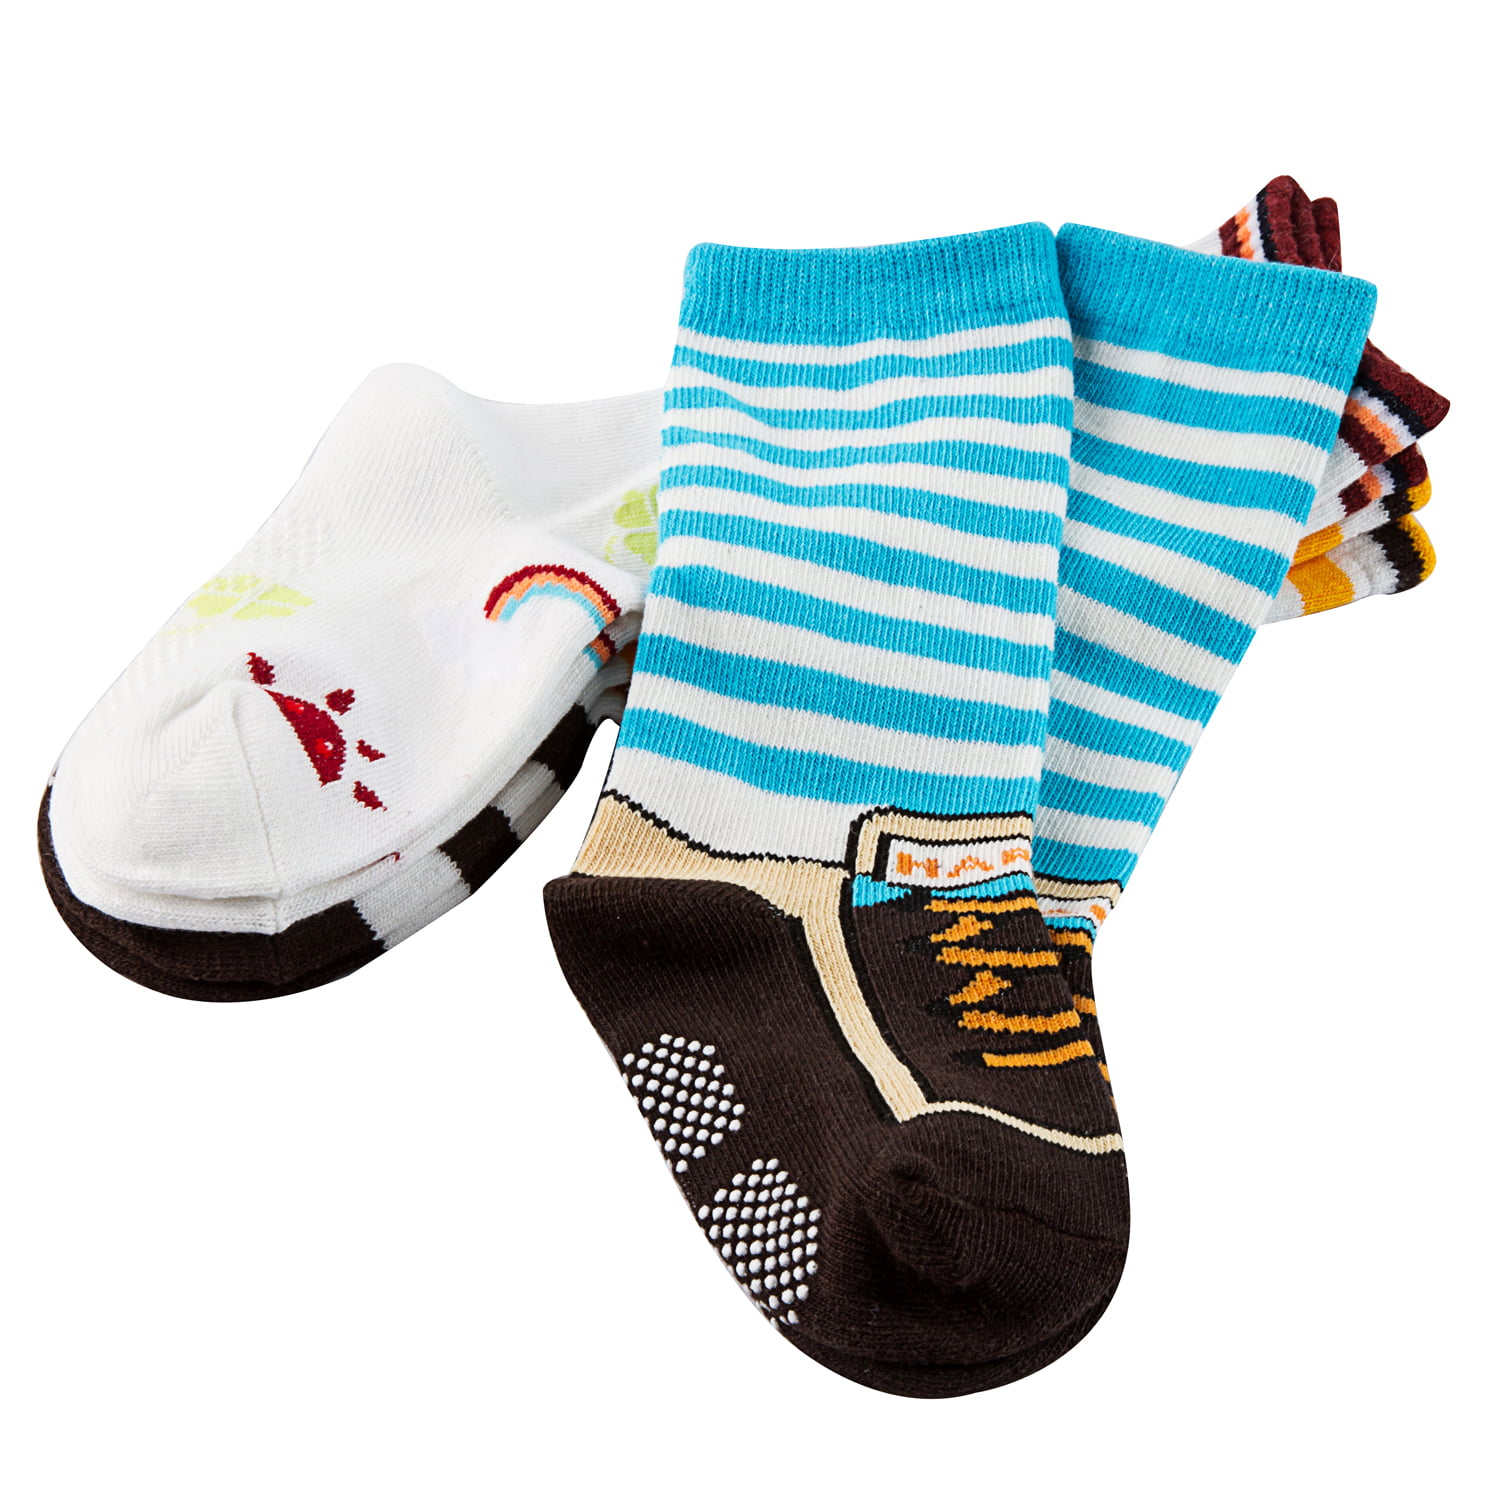 Toddler Boys ABS Cotton Blend Anti Non Slip Socks 3 Pairs Size 0-12 months Baby 